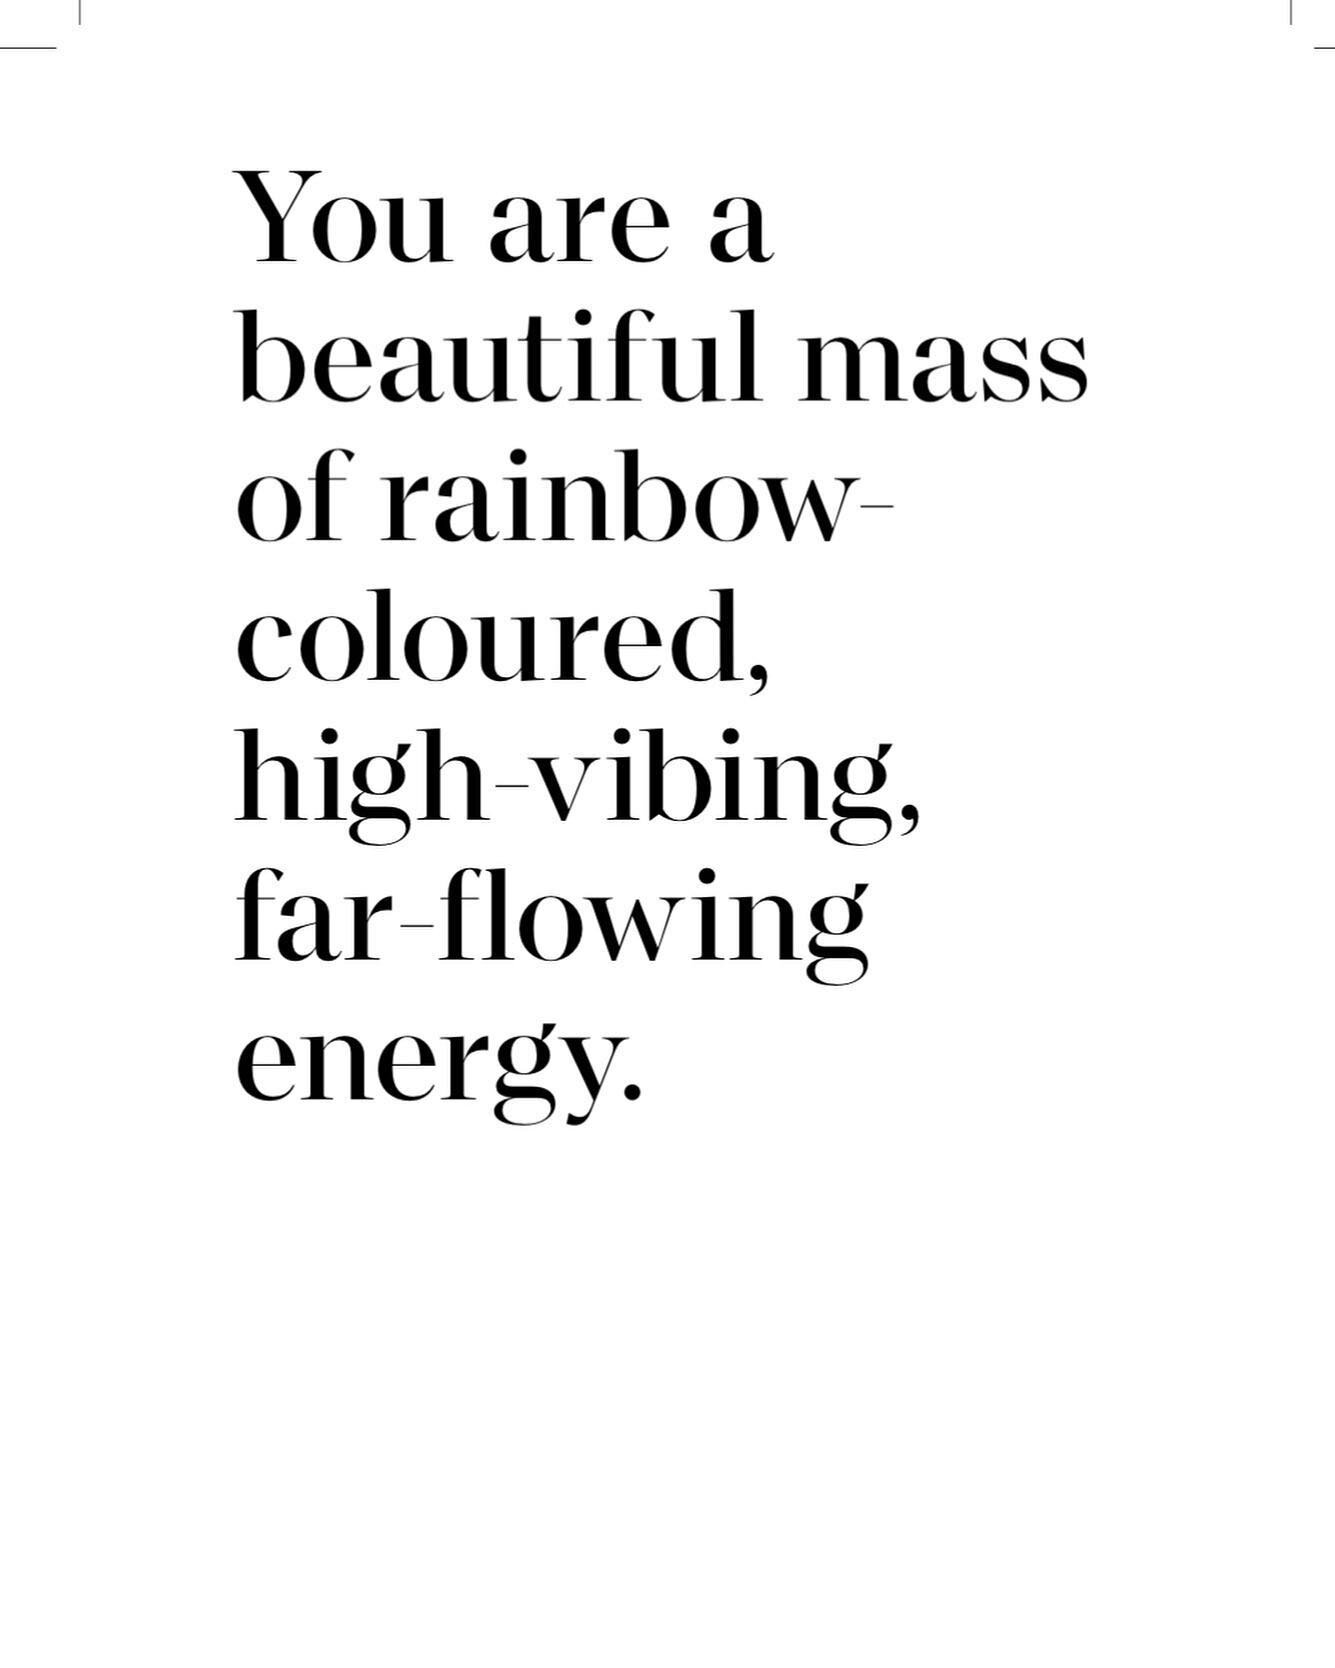 Auras... coming August 18th 🌈 the count down is on...🌈⁣
⁣
⁣
#book #launch #youarearainbowofpossibilities #vibe #highvibe #countdown #quoted #youare #rainbow #energy #vibe #frequency #quote #instabook #girlboss #blessed #🌈